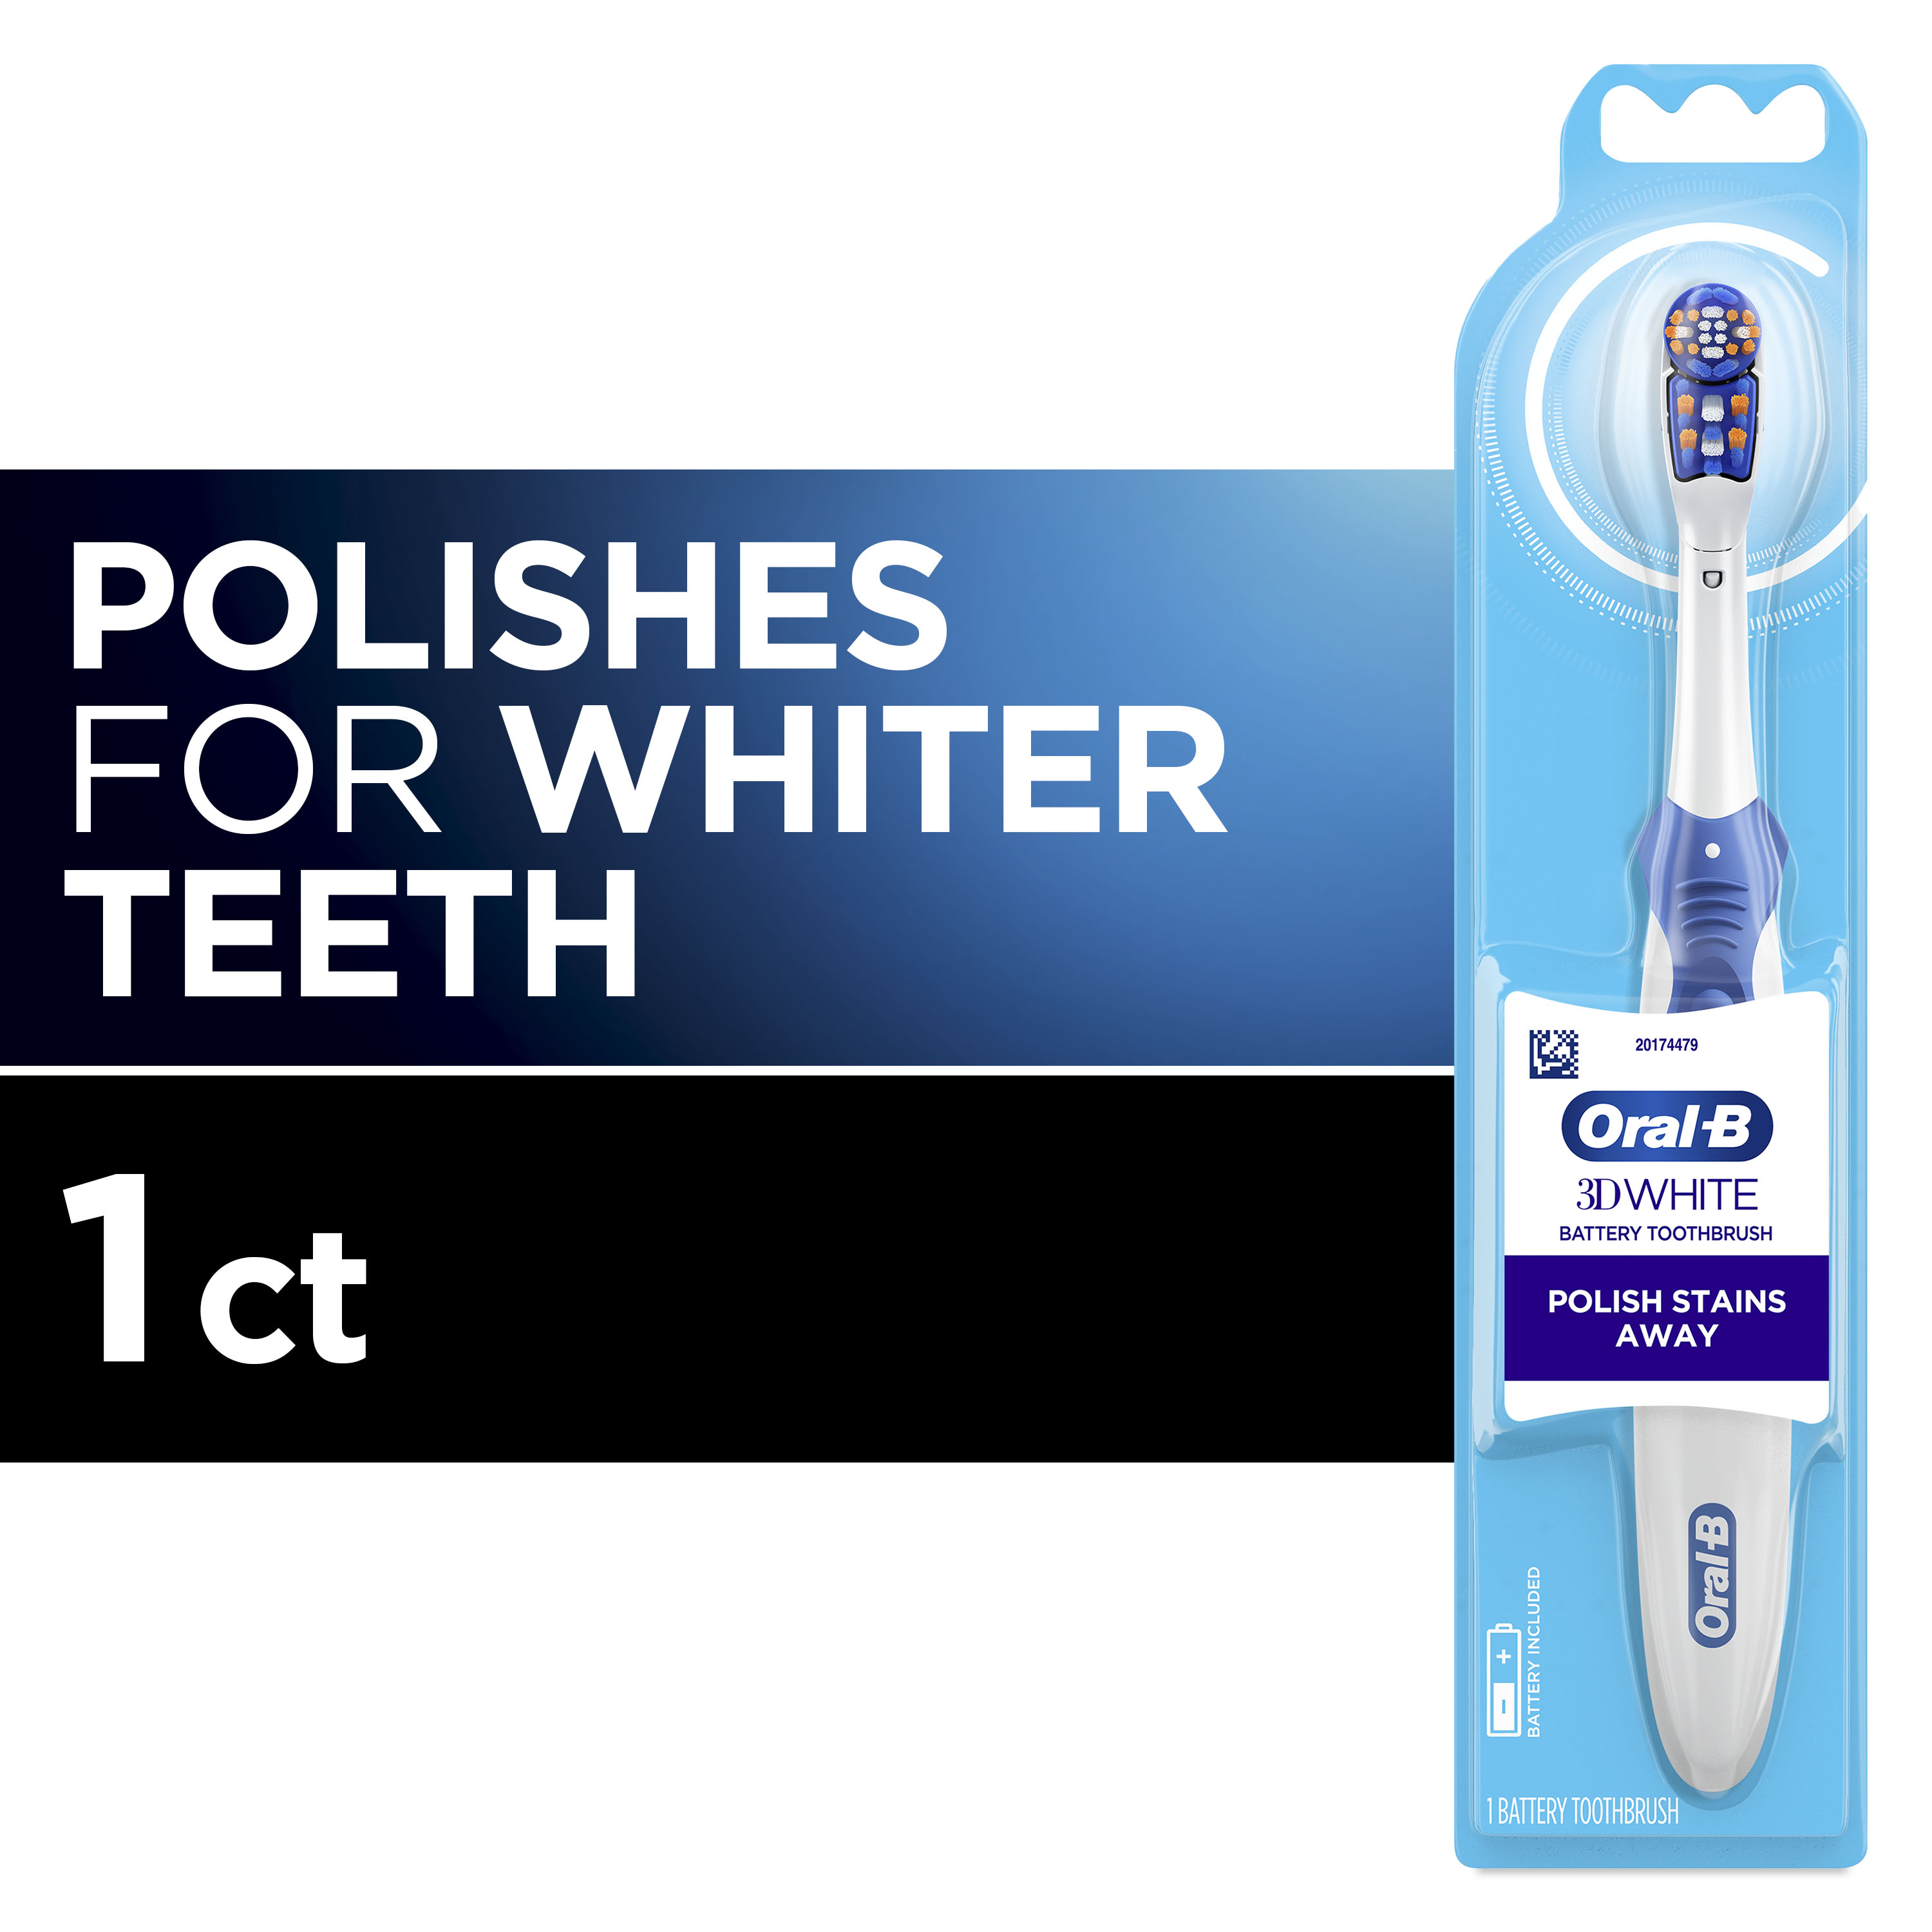 Oral-B 3D White Battery Toothbrush, 1 Count, Colors May Vary, for Adults and Children 3+ - image 3 of 12